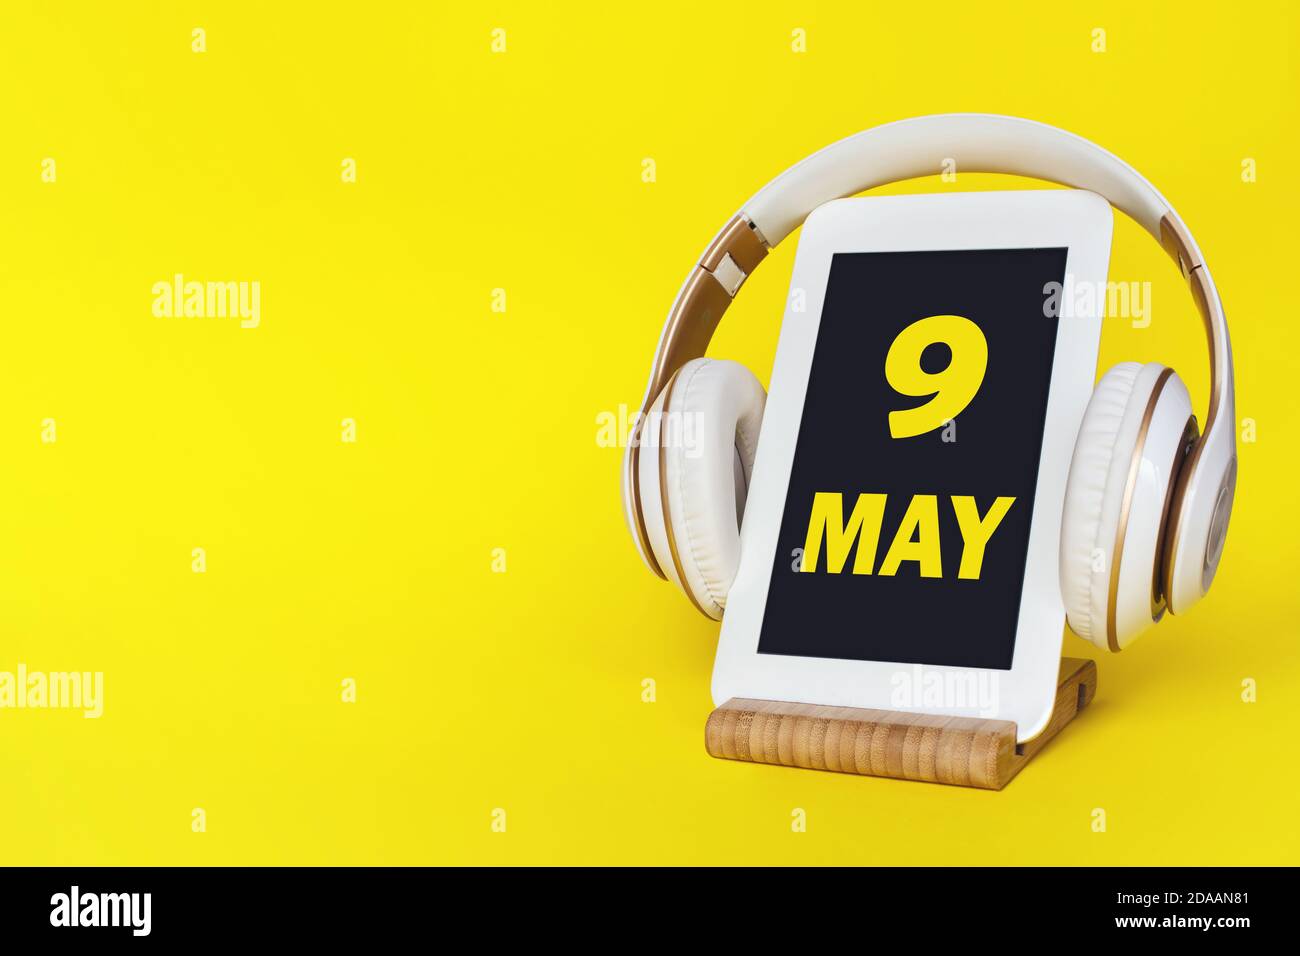 May 9th. Day 9 of month, Calendar date. Stylish headphones and modern tablet on yellow background. Space for text. Concept education, technology, life Stock Photo